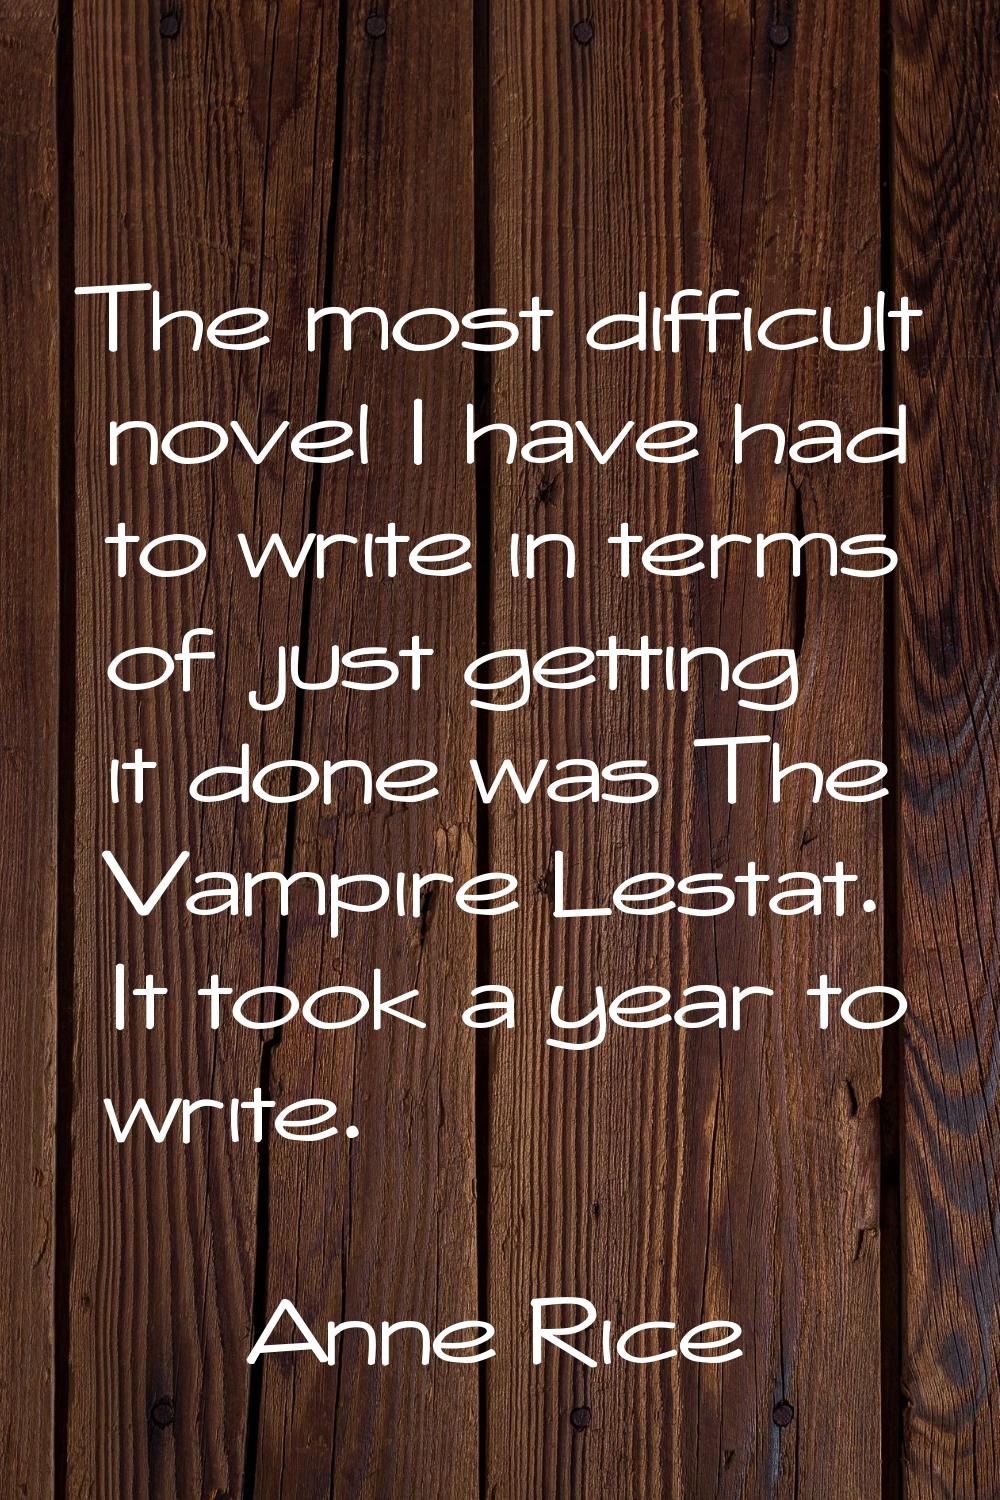 The most difficult novel I have had to write in terms of just getting it done was The Vampire Lesta